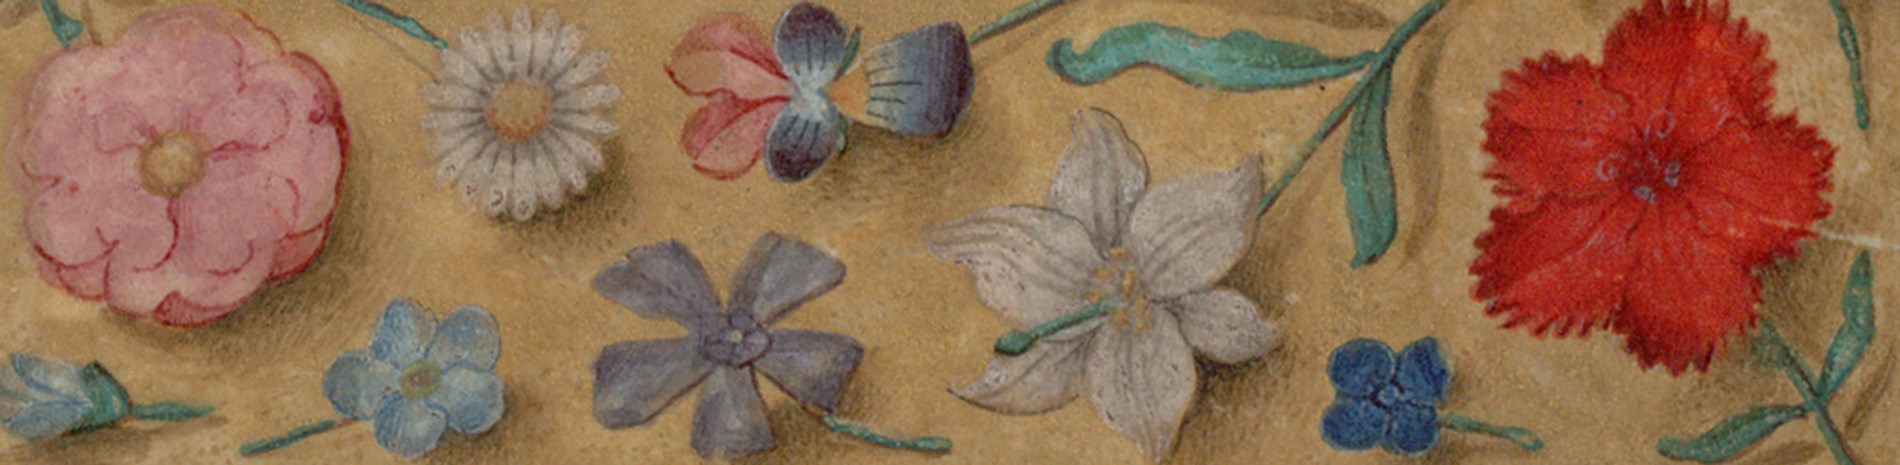 A close-up of an illuminated manuscript showing flowers on a washed yellow background.